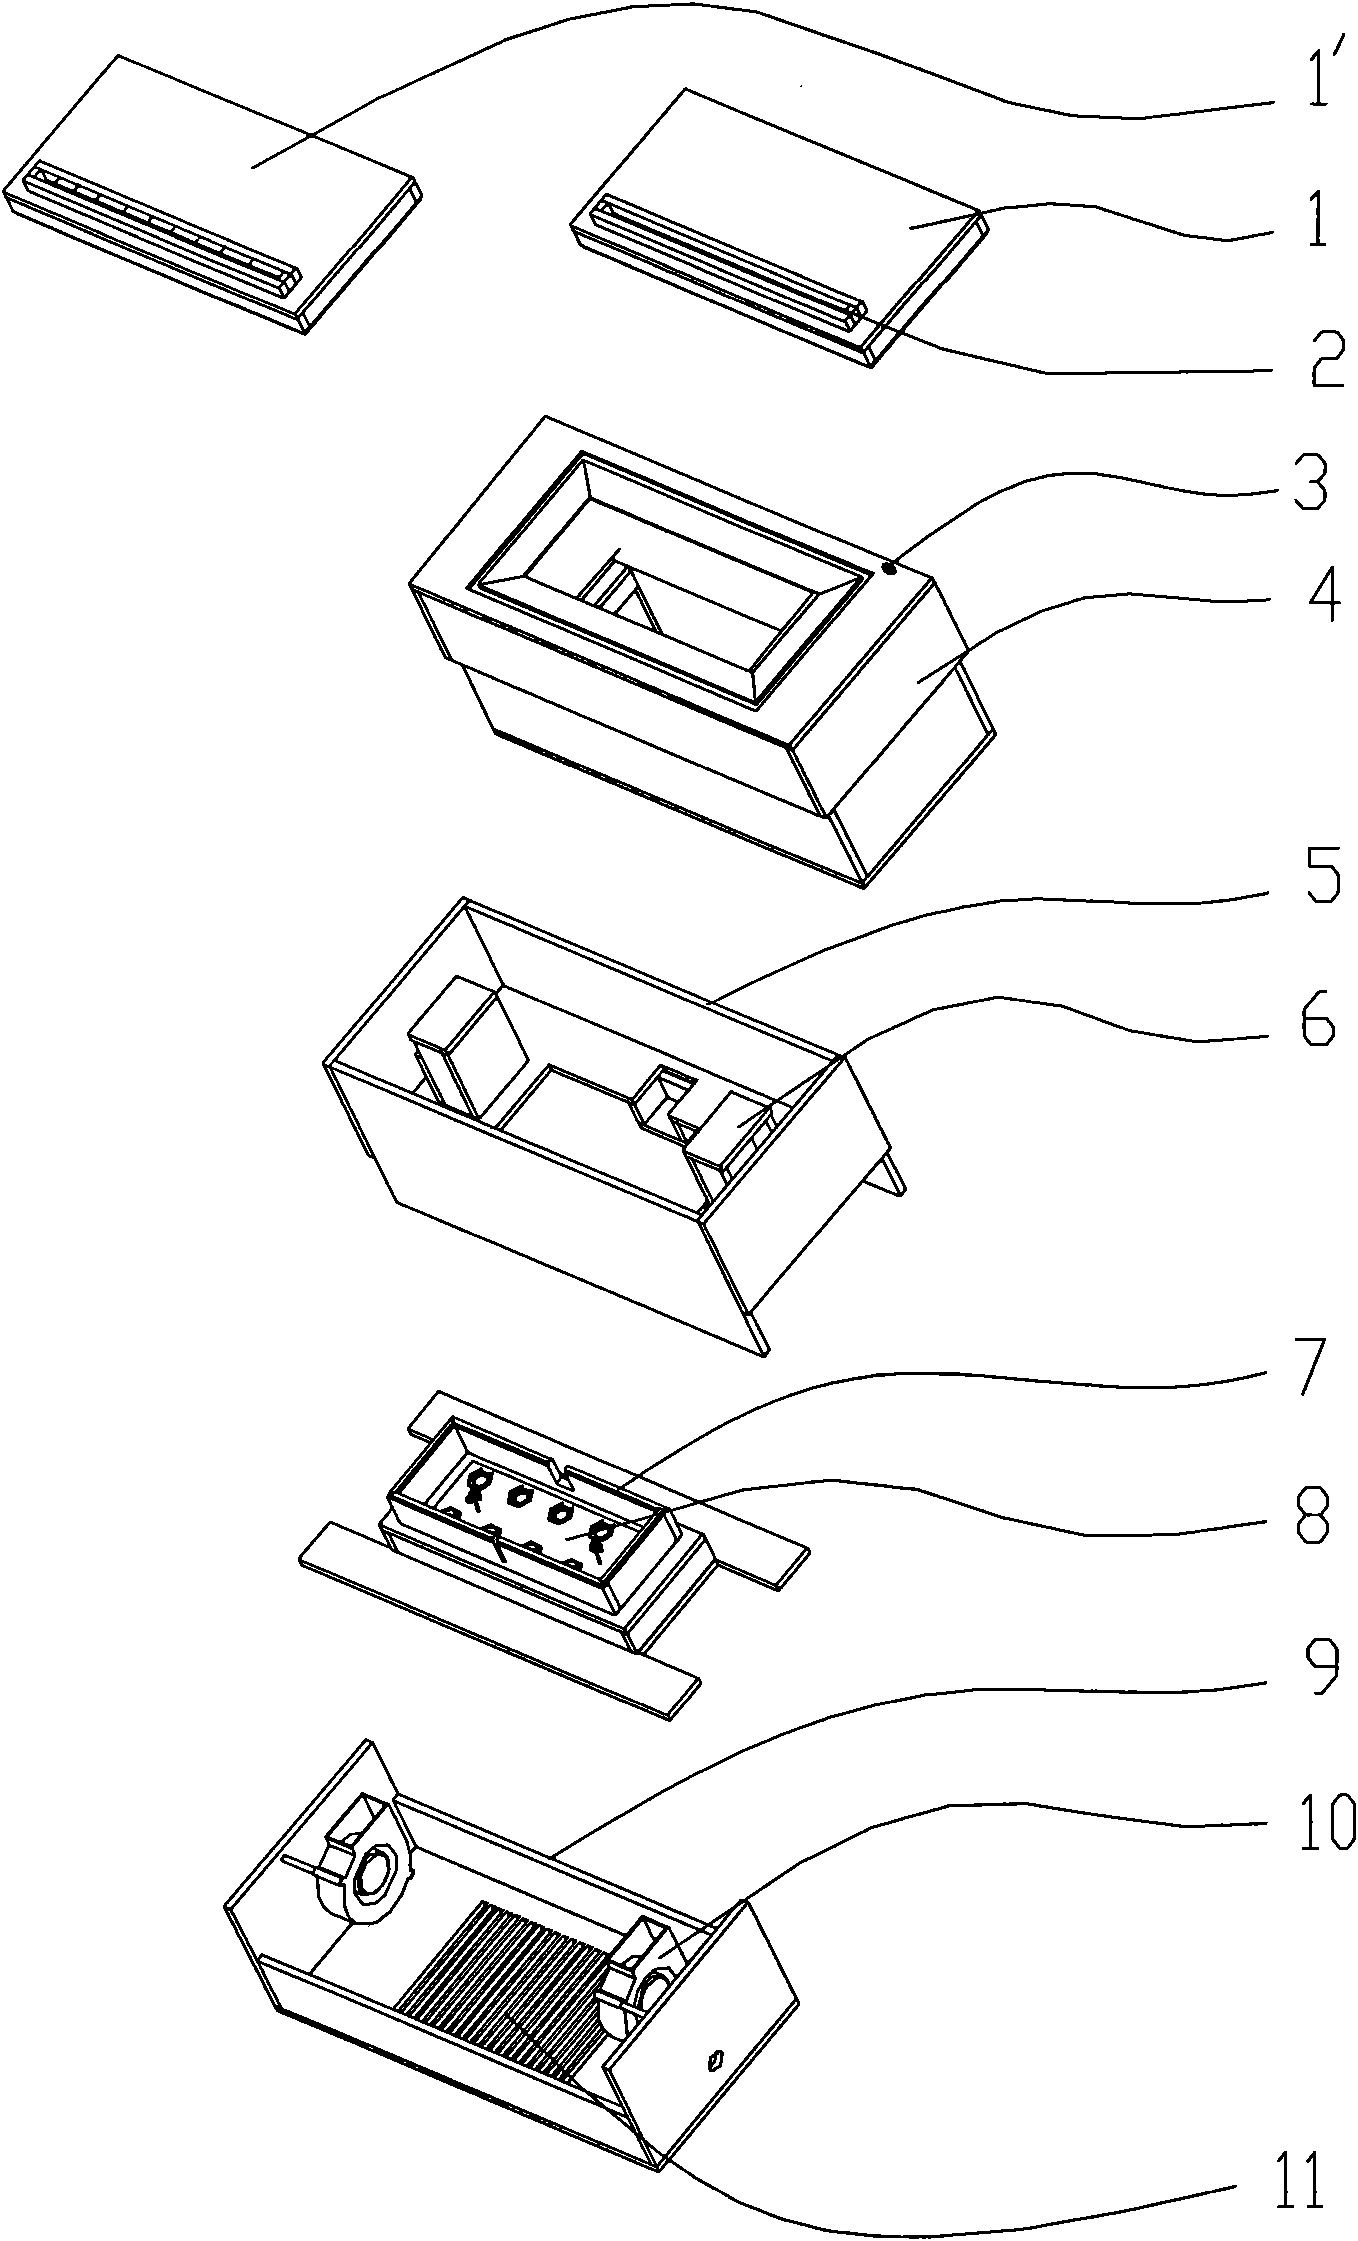 Ultrasonic soldering flux coating process and device